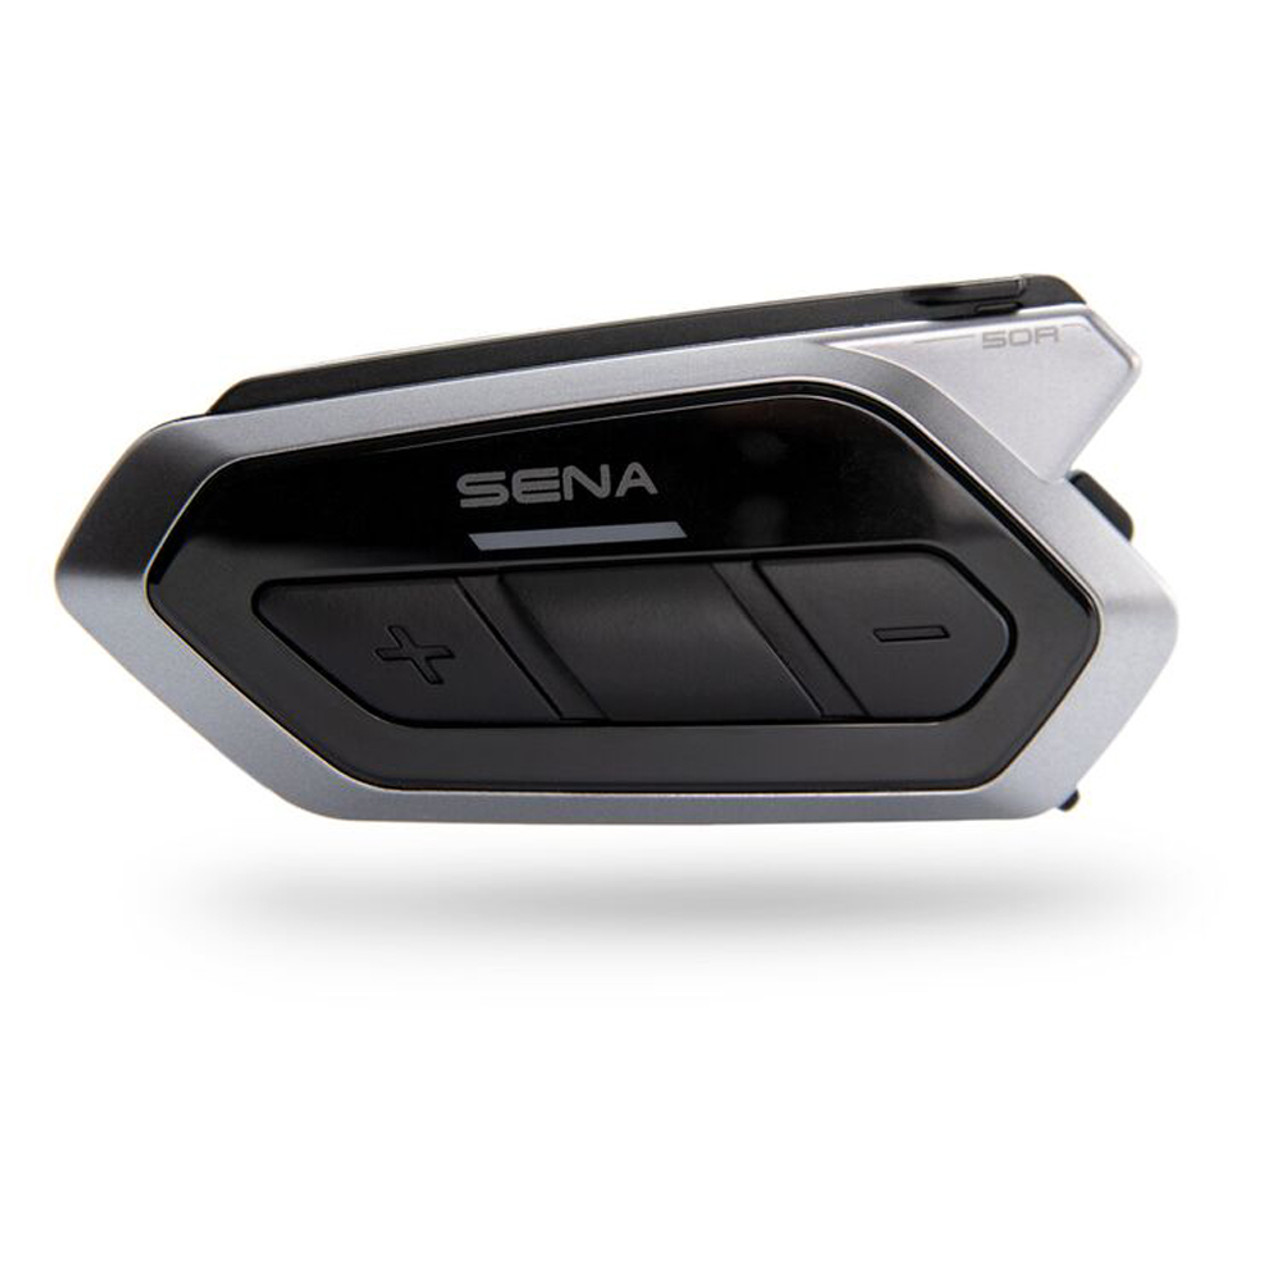 Sena 50S Review: The Must-Have Features